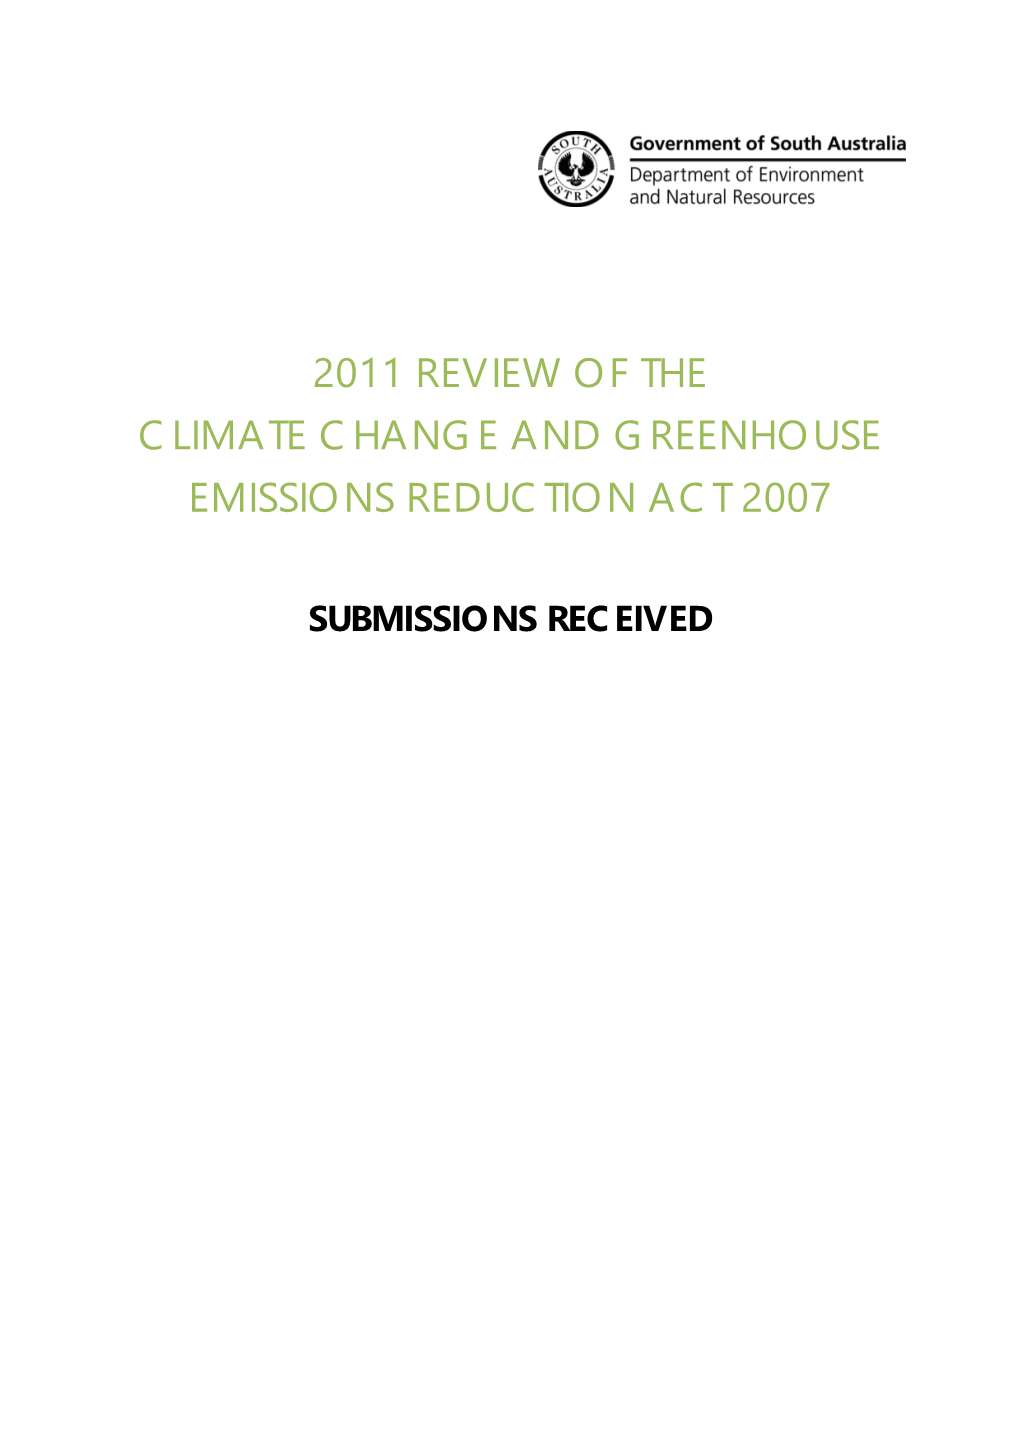 2011 Review of the Climate Change and Greenhouse Emissions Reduction Act 2007